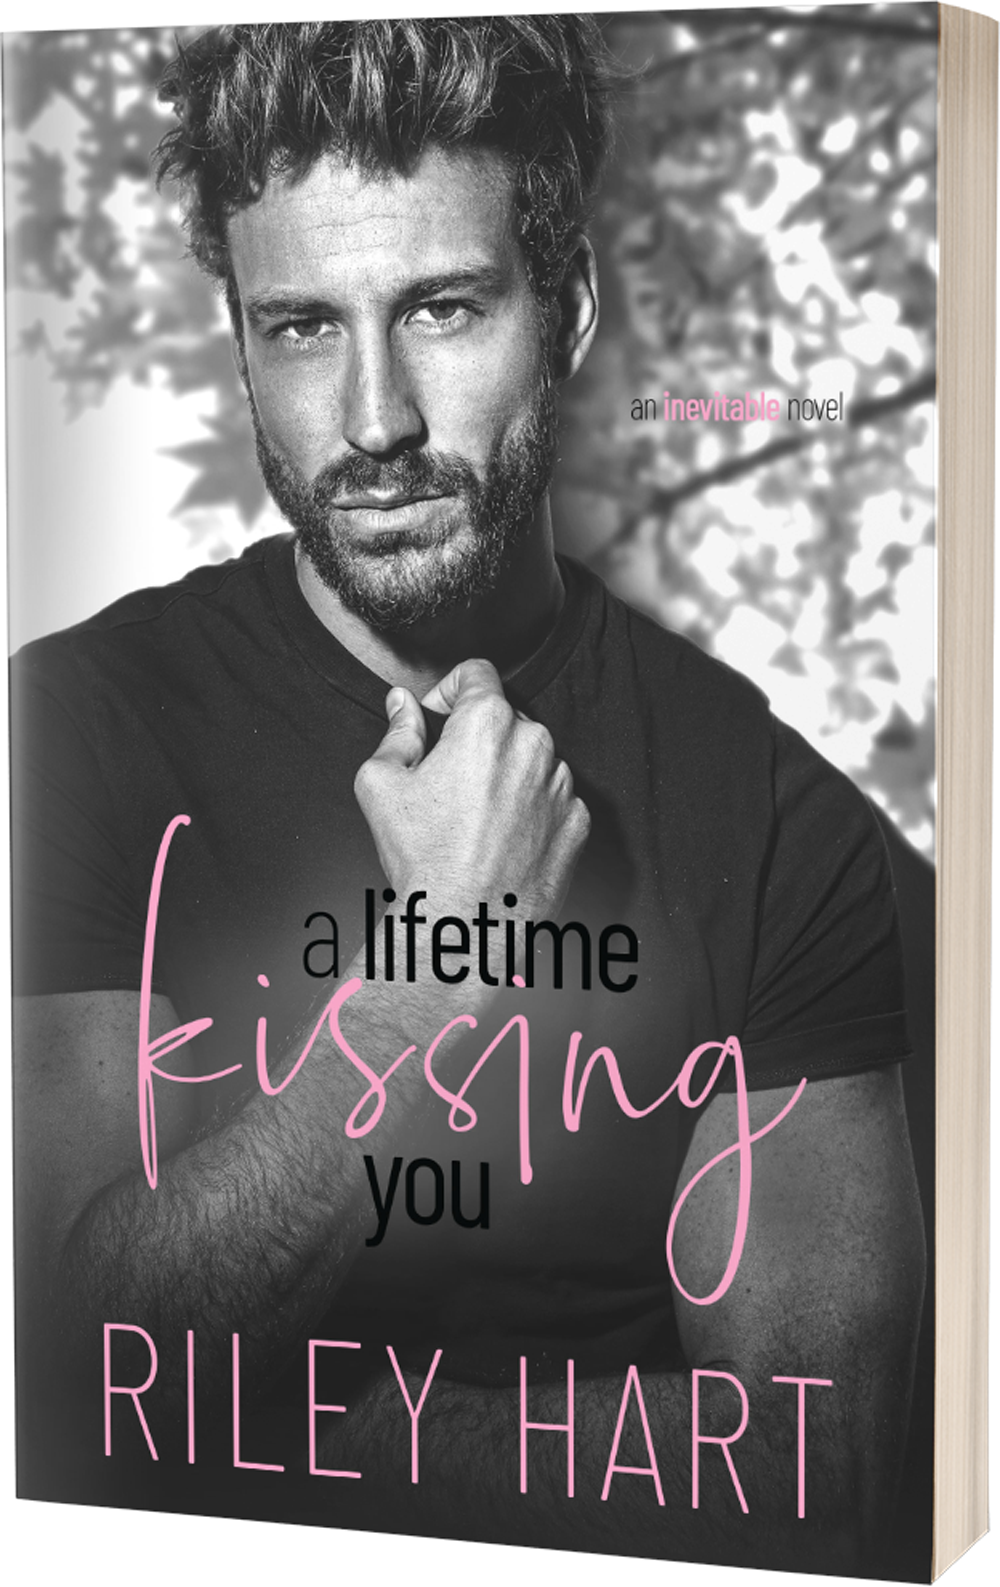 A Lifetime Kissing You signed paperback